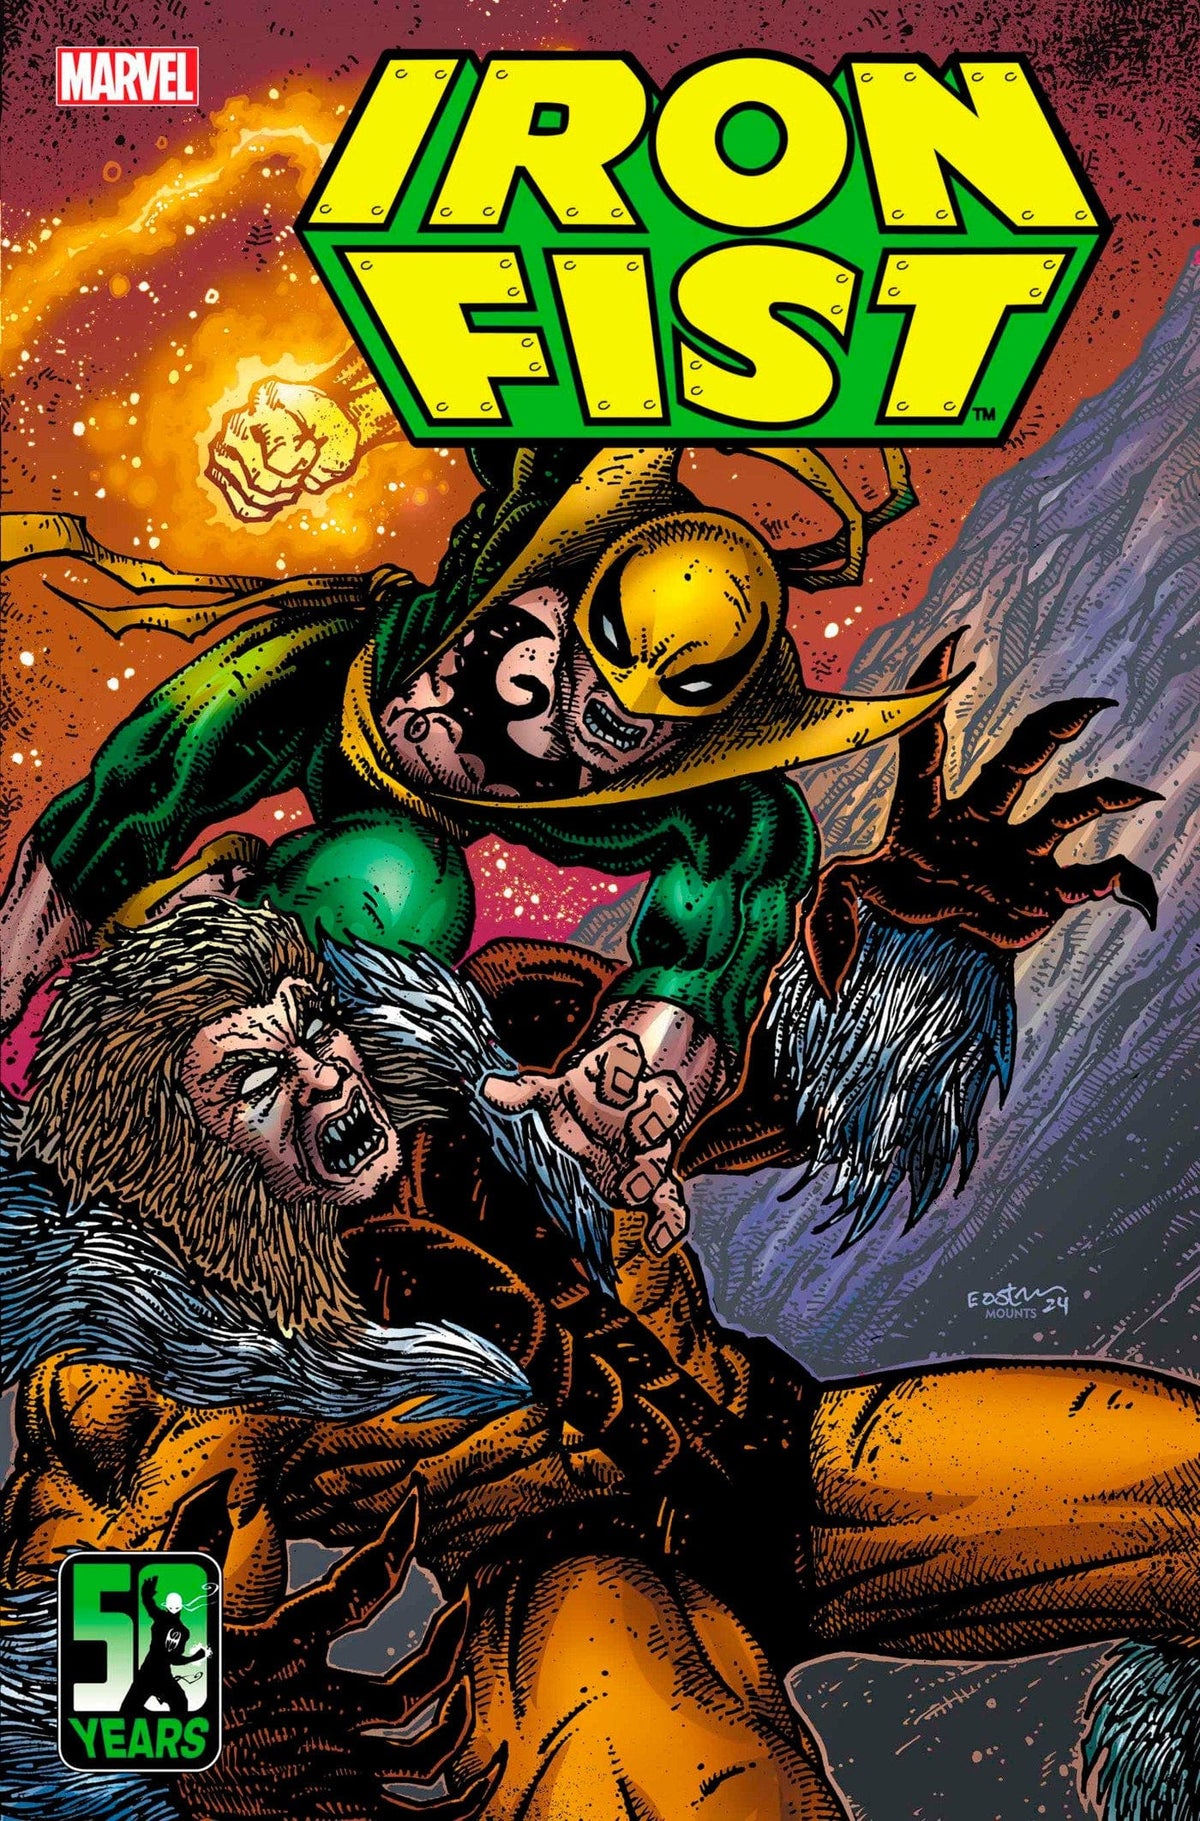 IRON FIST 50TH ANNIVERSARY SPECIAL #1 KEVIN EASTMAN VARIANT